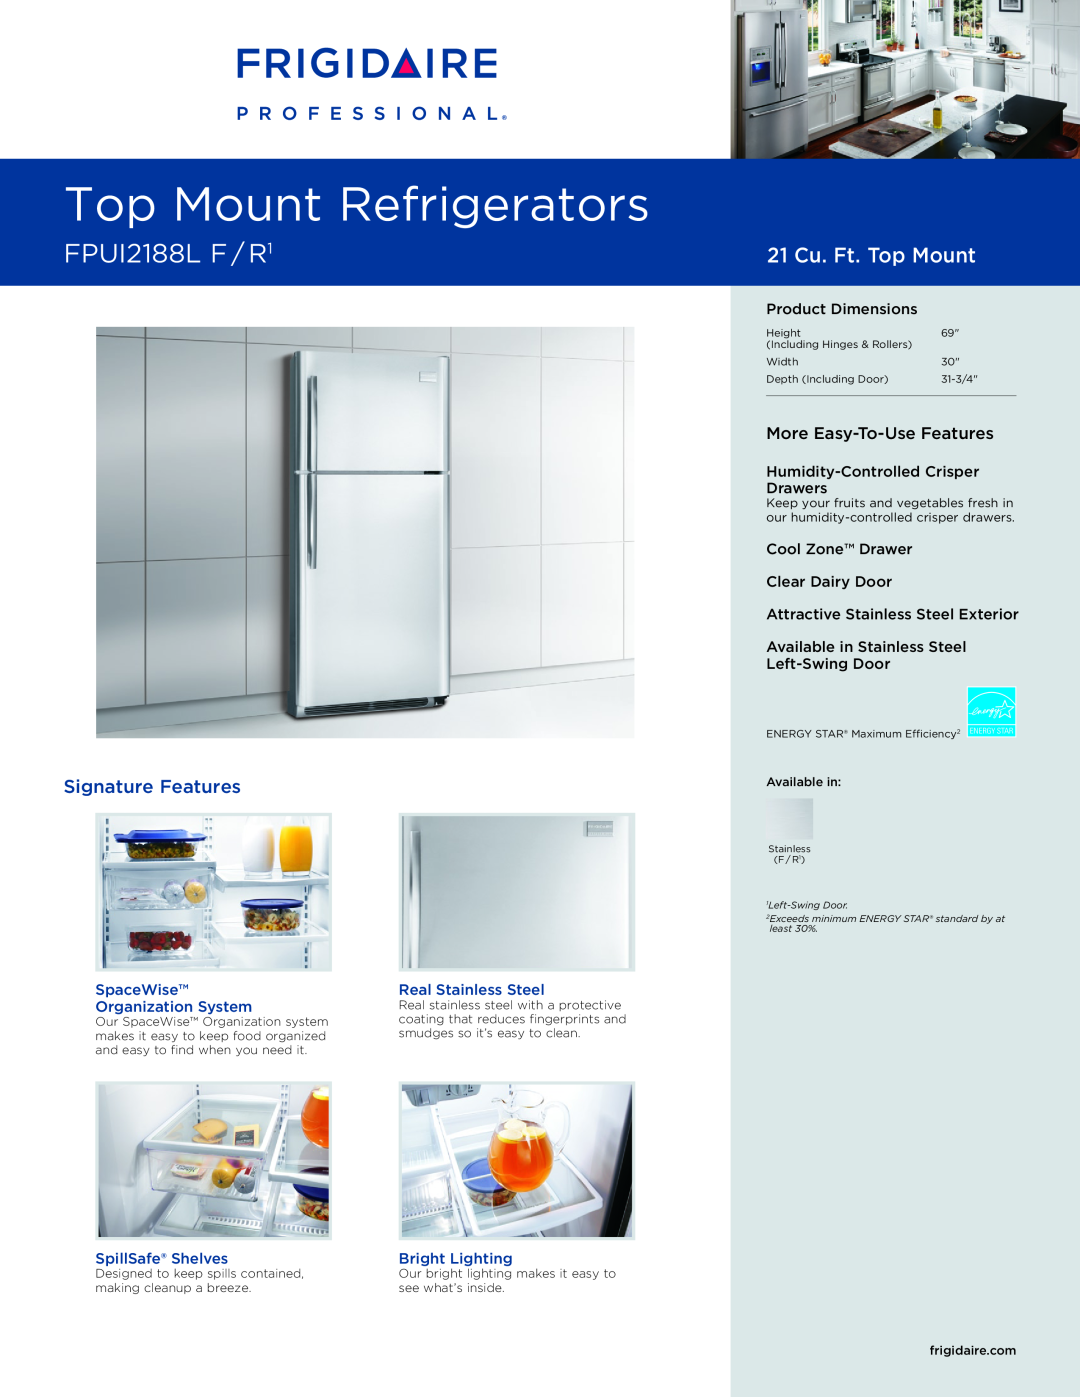 Frigidaire FPUI2188L F/R1 dimensions Top Mount Refrigerators, FPUI2188L F / R1, 21 Cu. Ft. Top Mount, Signature Features 